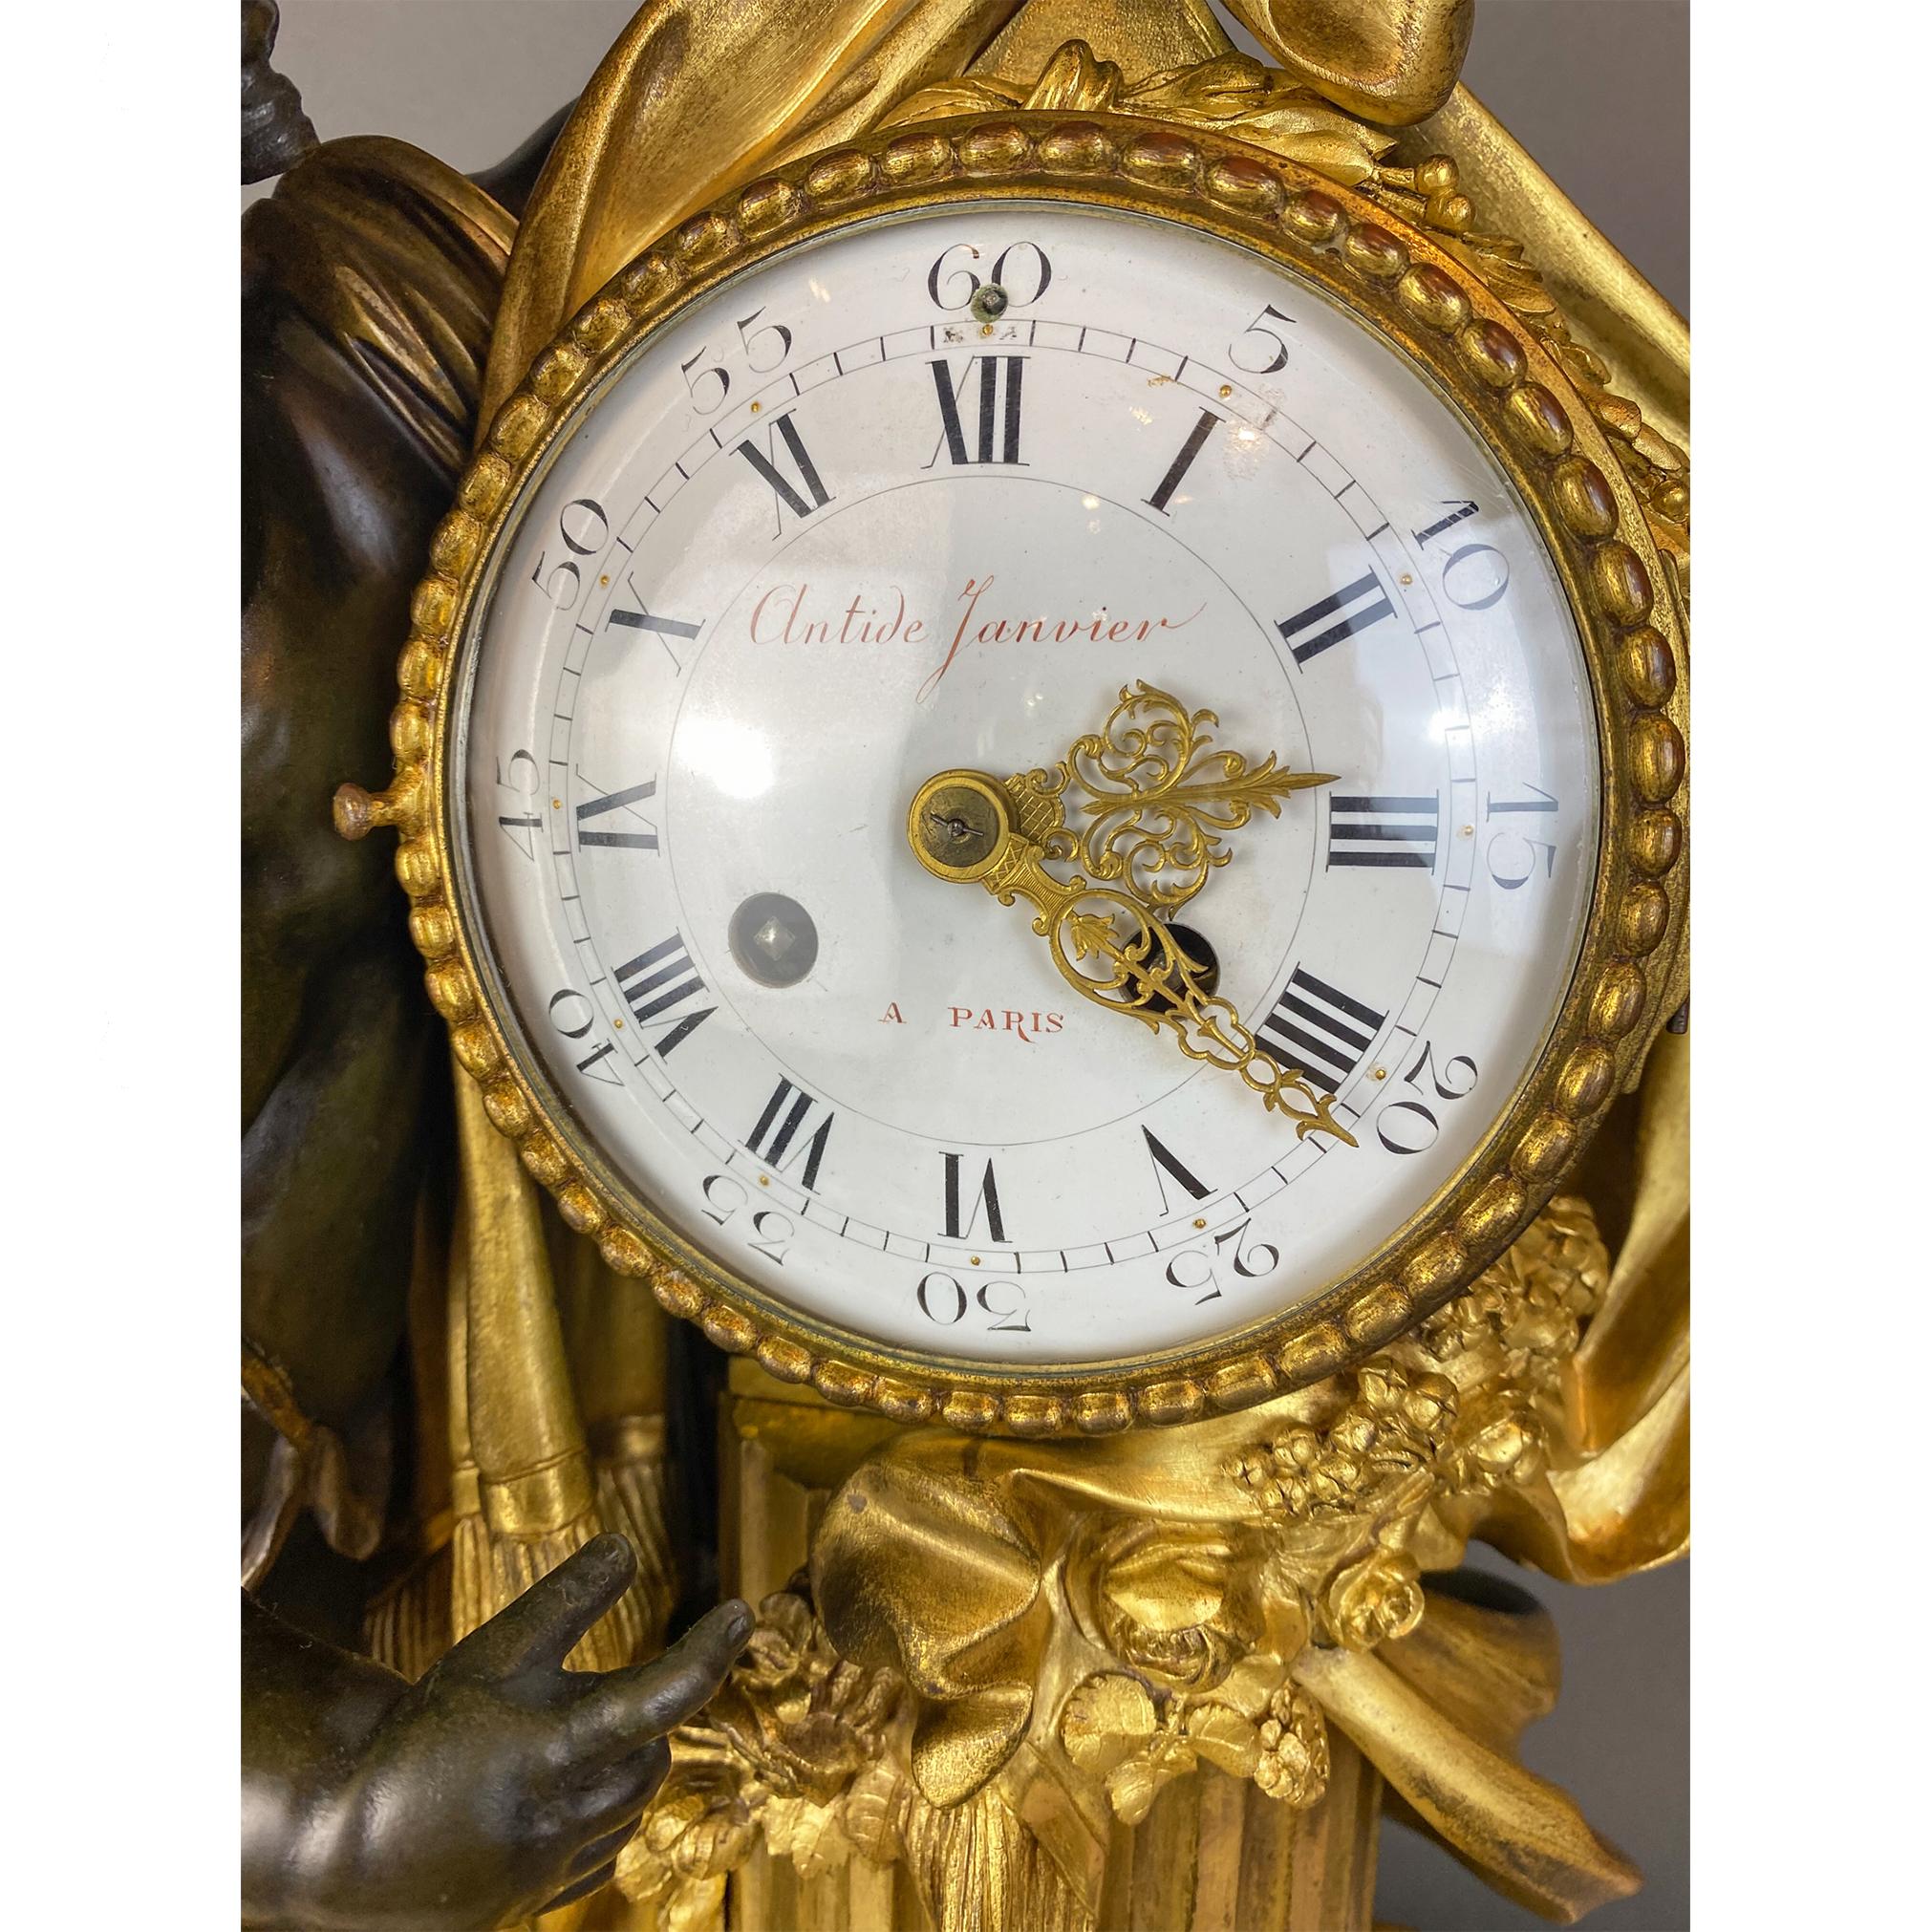 Fine Gilt and Patinated Bronze Mantel Clock with Putti by A Paris  In Good Condition For Sale In New York, NY